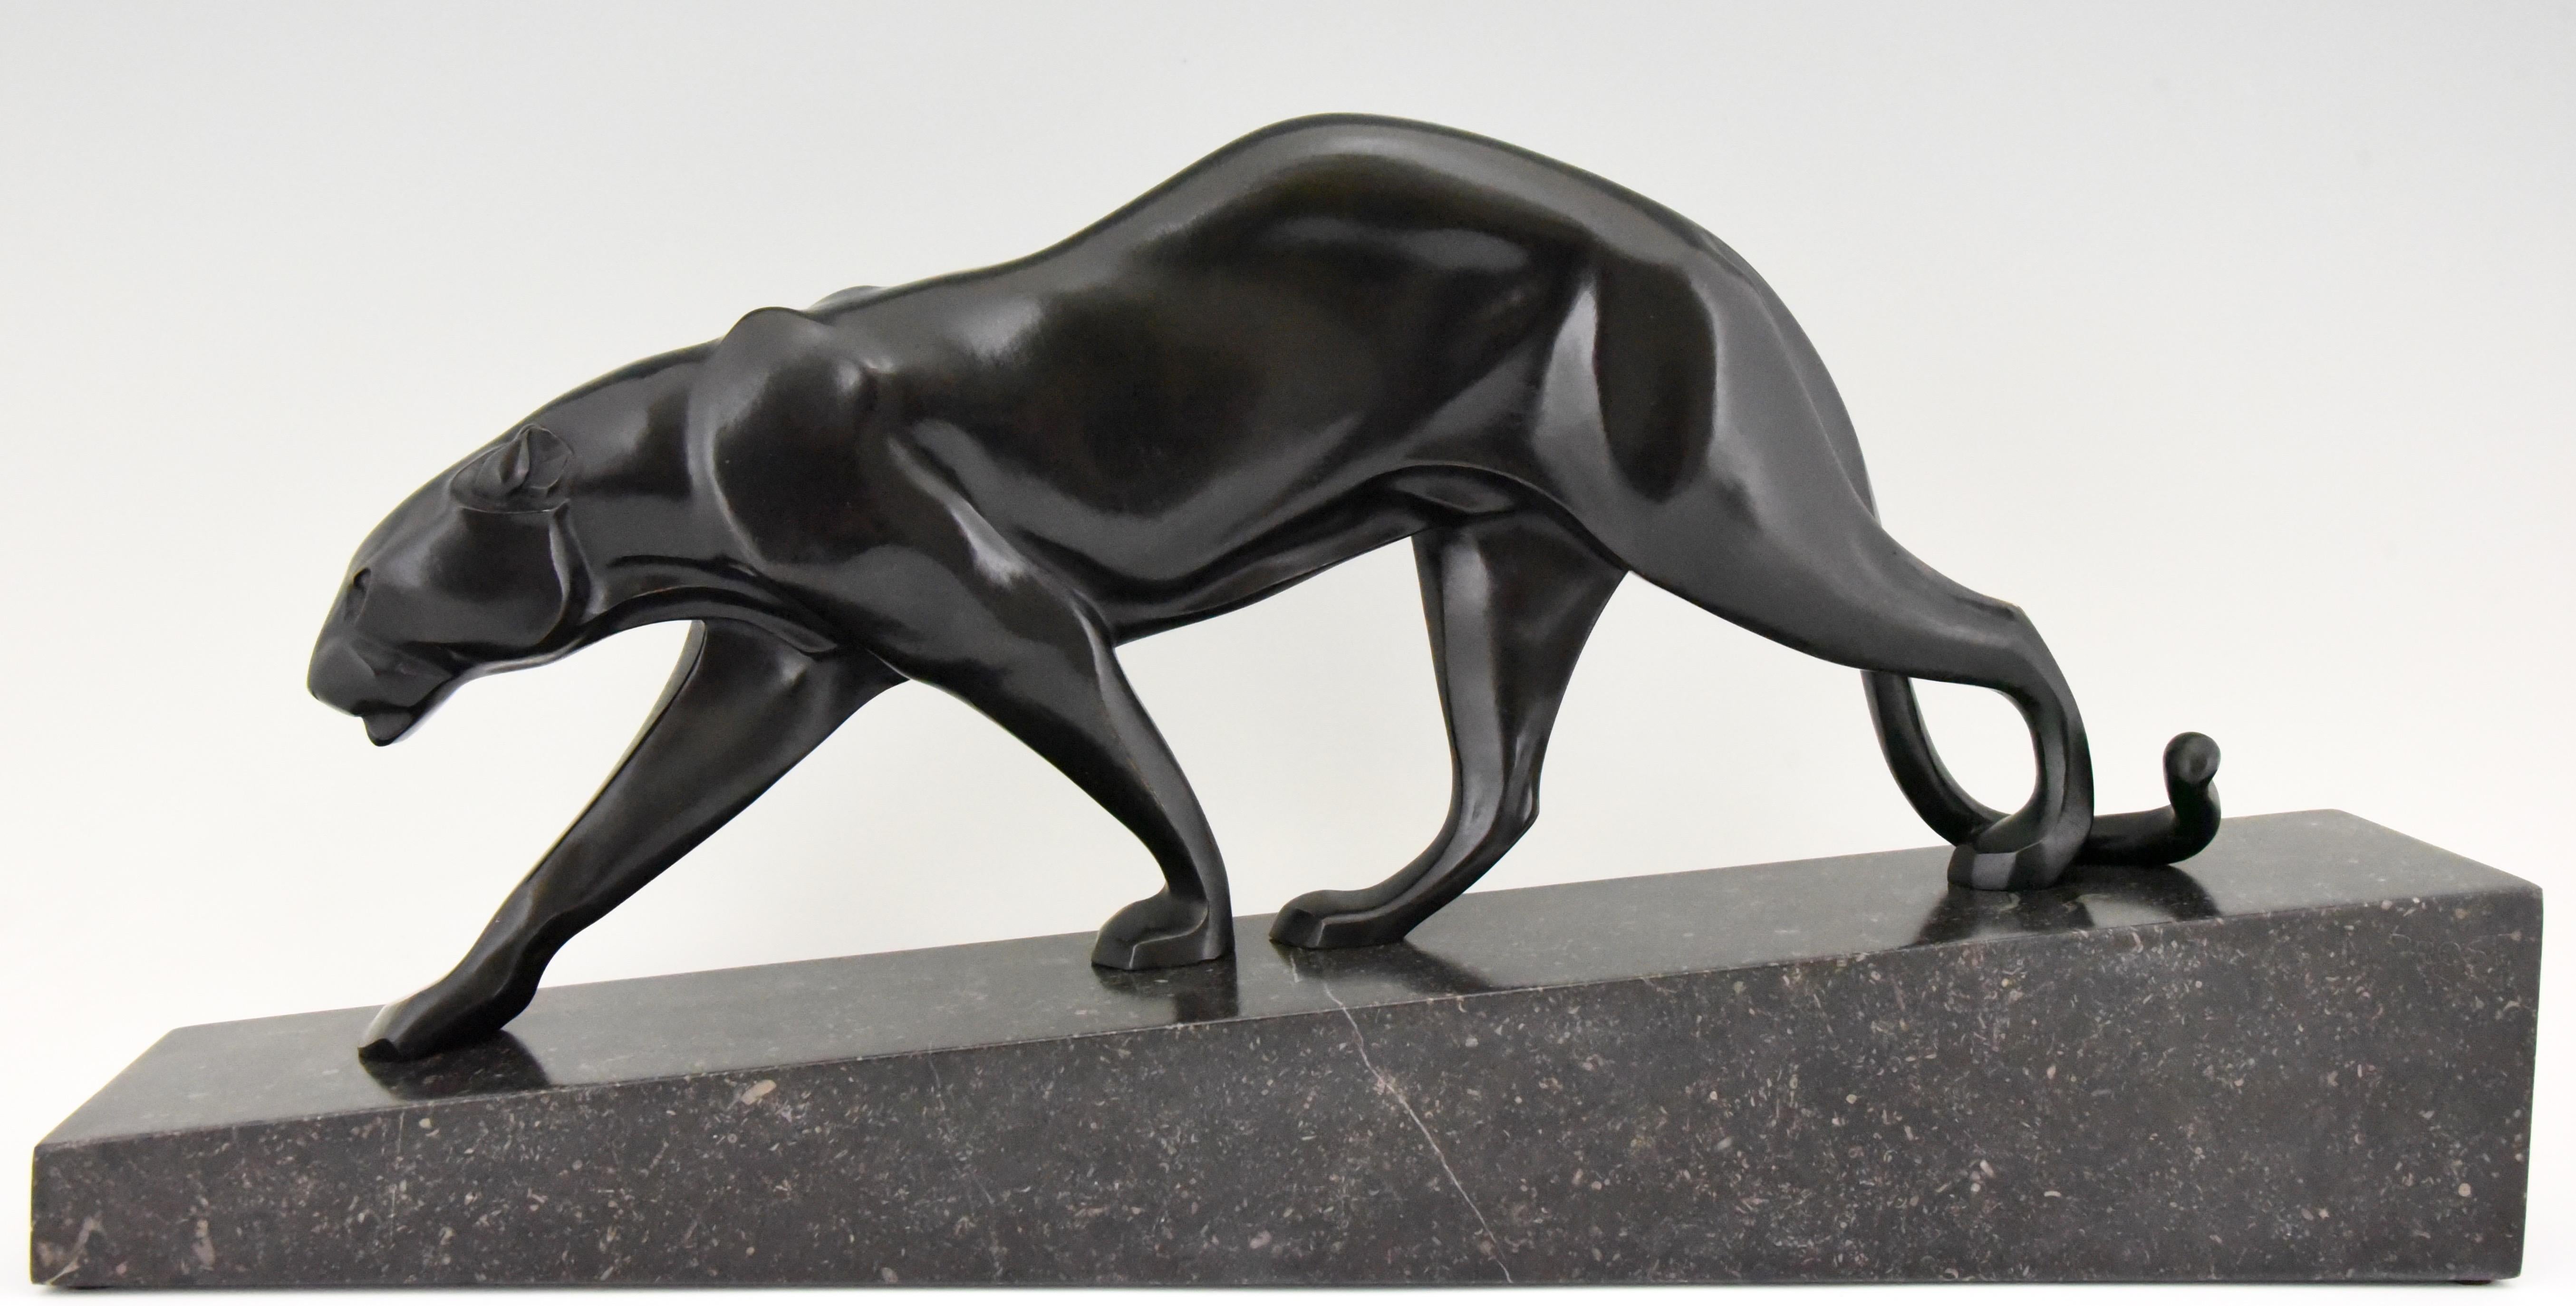 Impressive Art Deco bronze sculpture of a walking panther by the famous French sculptor Maurice Prost. The bronze has a beautiful black patina and stands on a black marble base with grey veins and specks
The sculpture has the founders' signature of